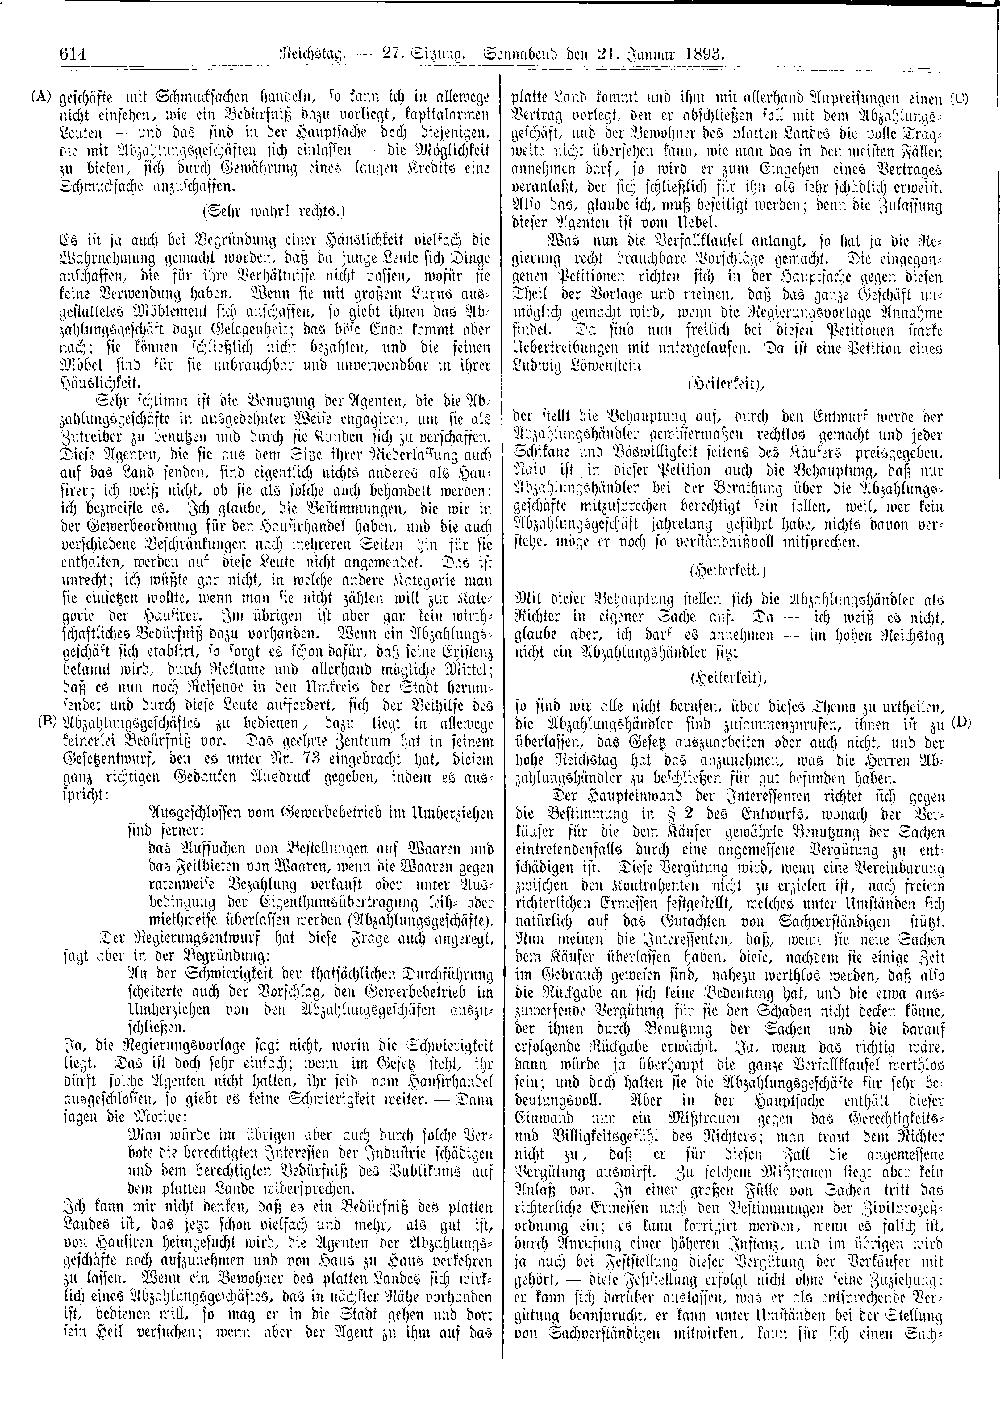 Scan of page 614